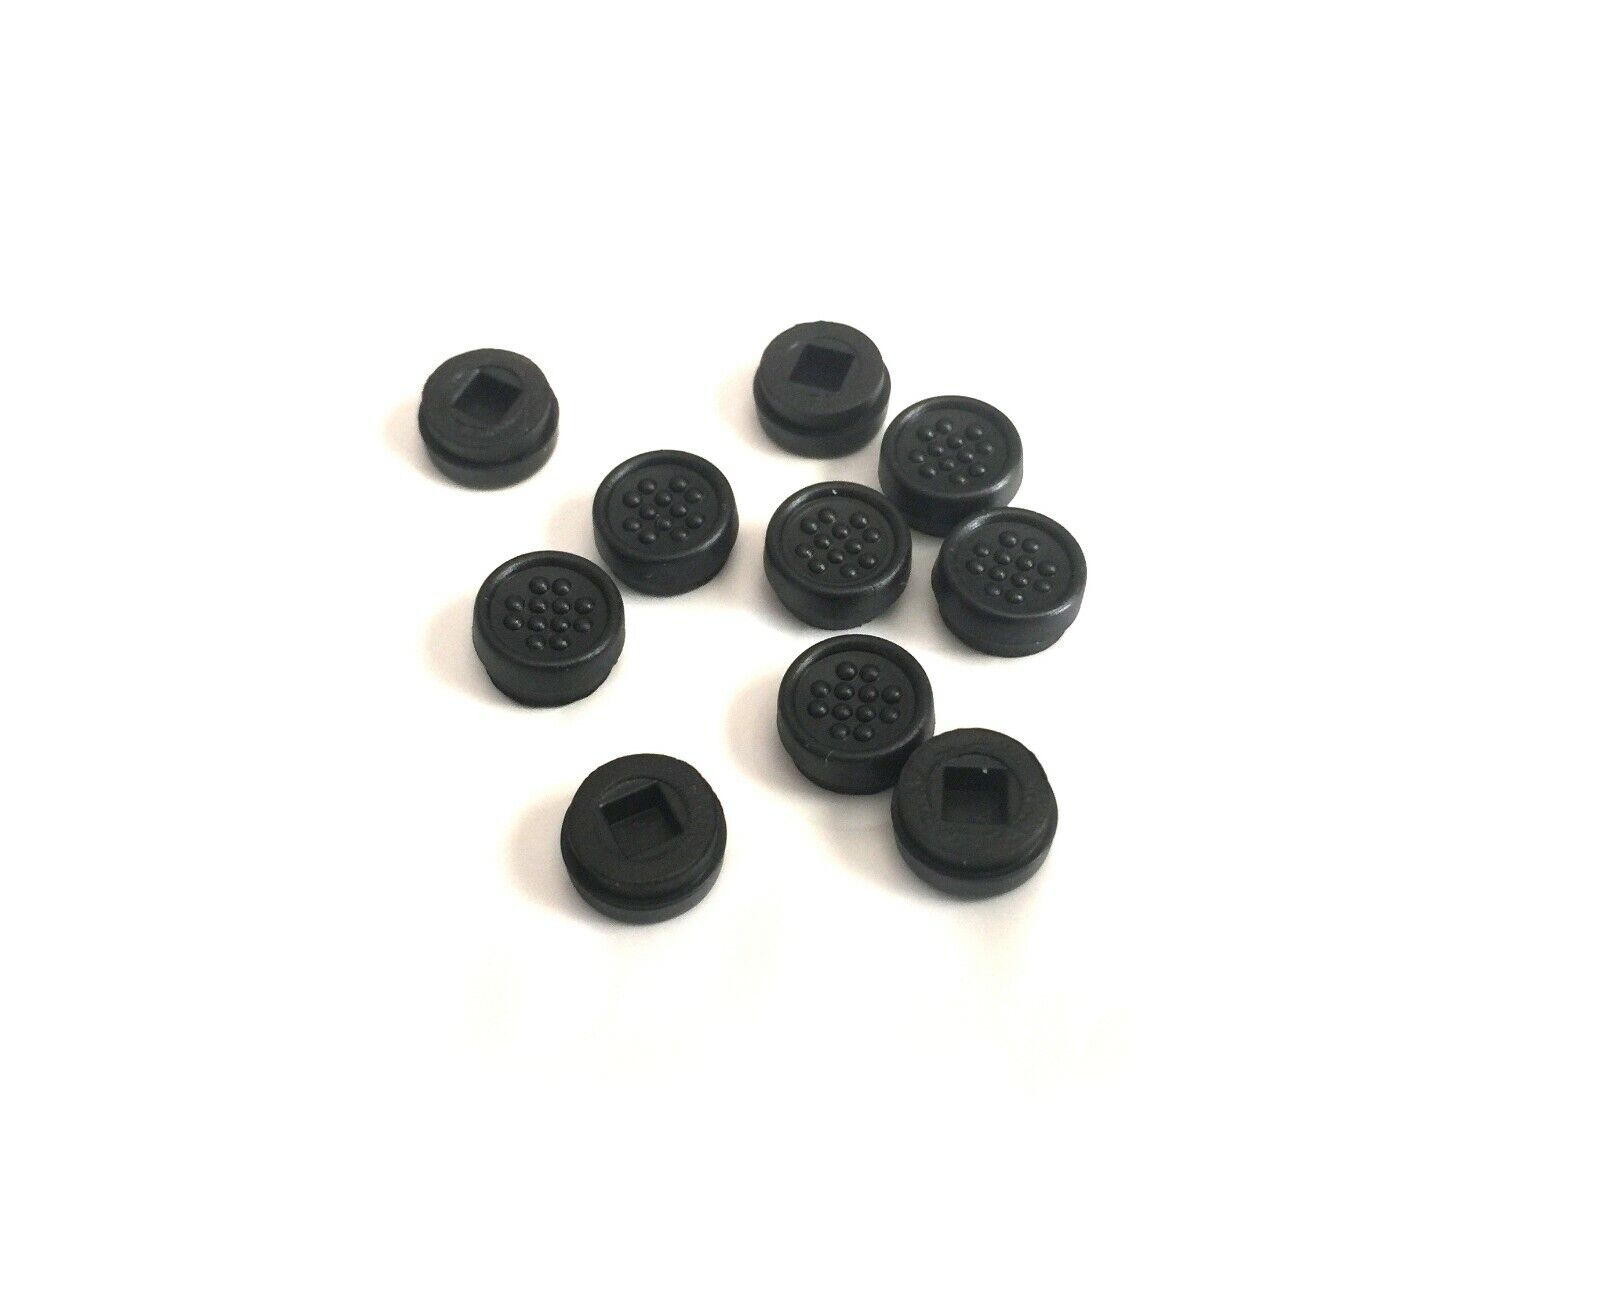 10 pcs FOR DELL BLACK LAPTOP KEYBOARD MOUSE STICK / POINT TRACKPOINT POINTER CAP